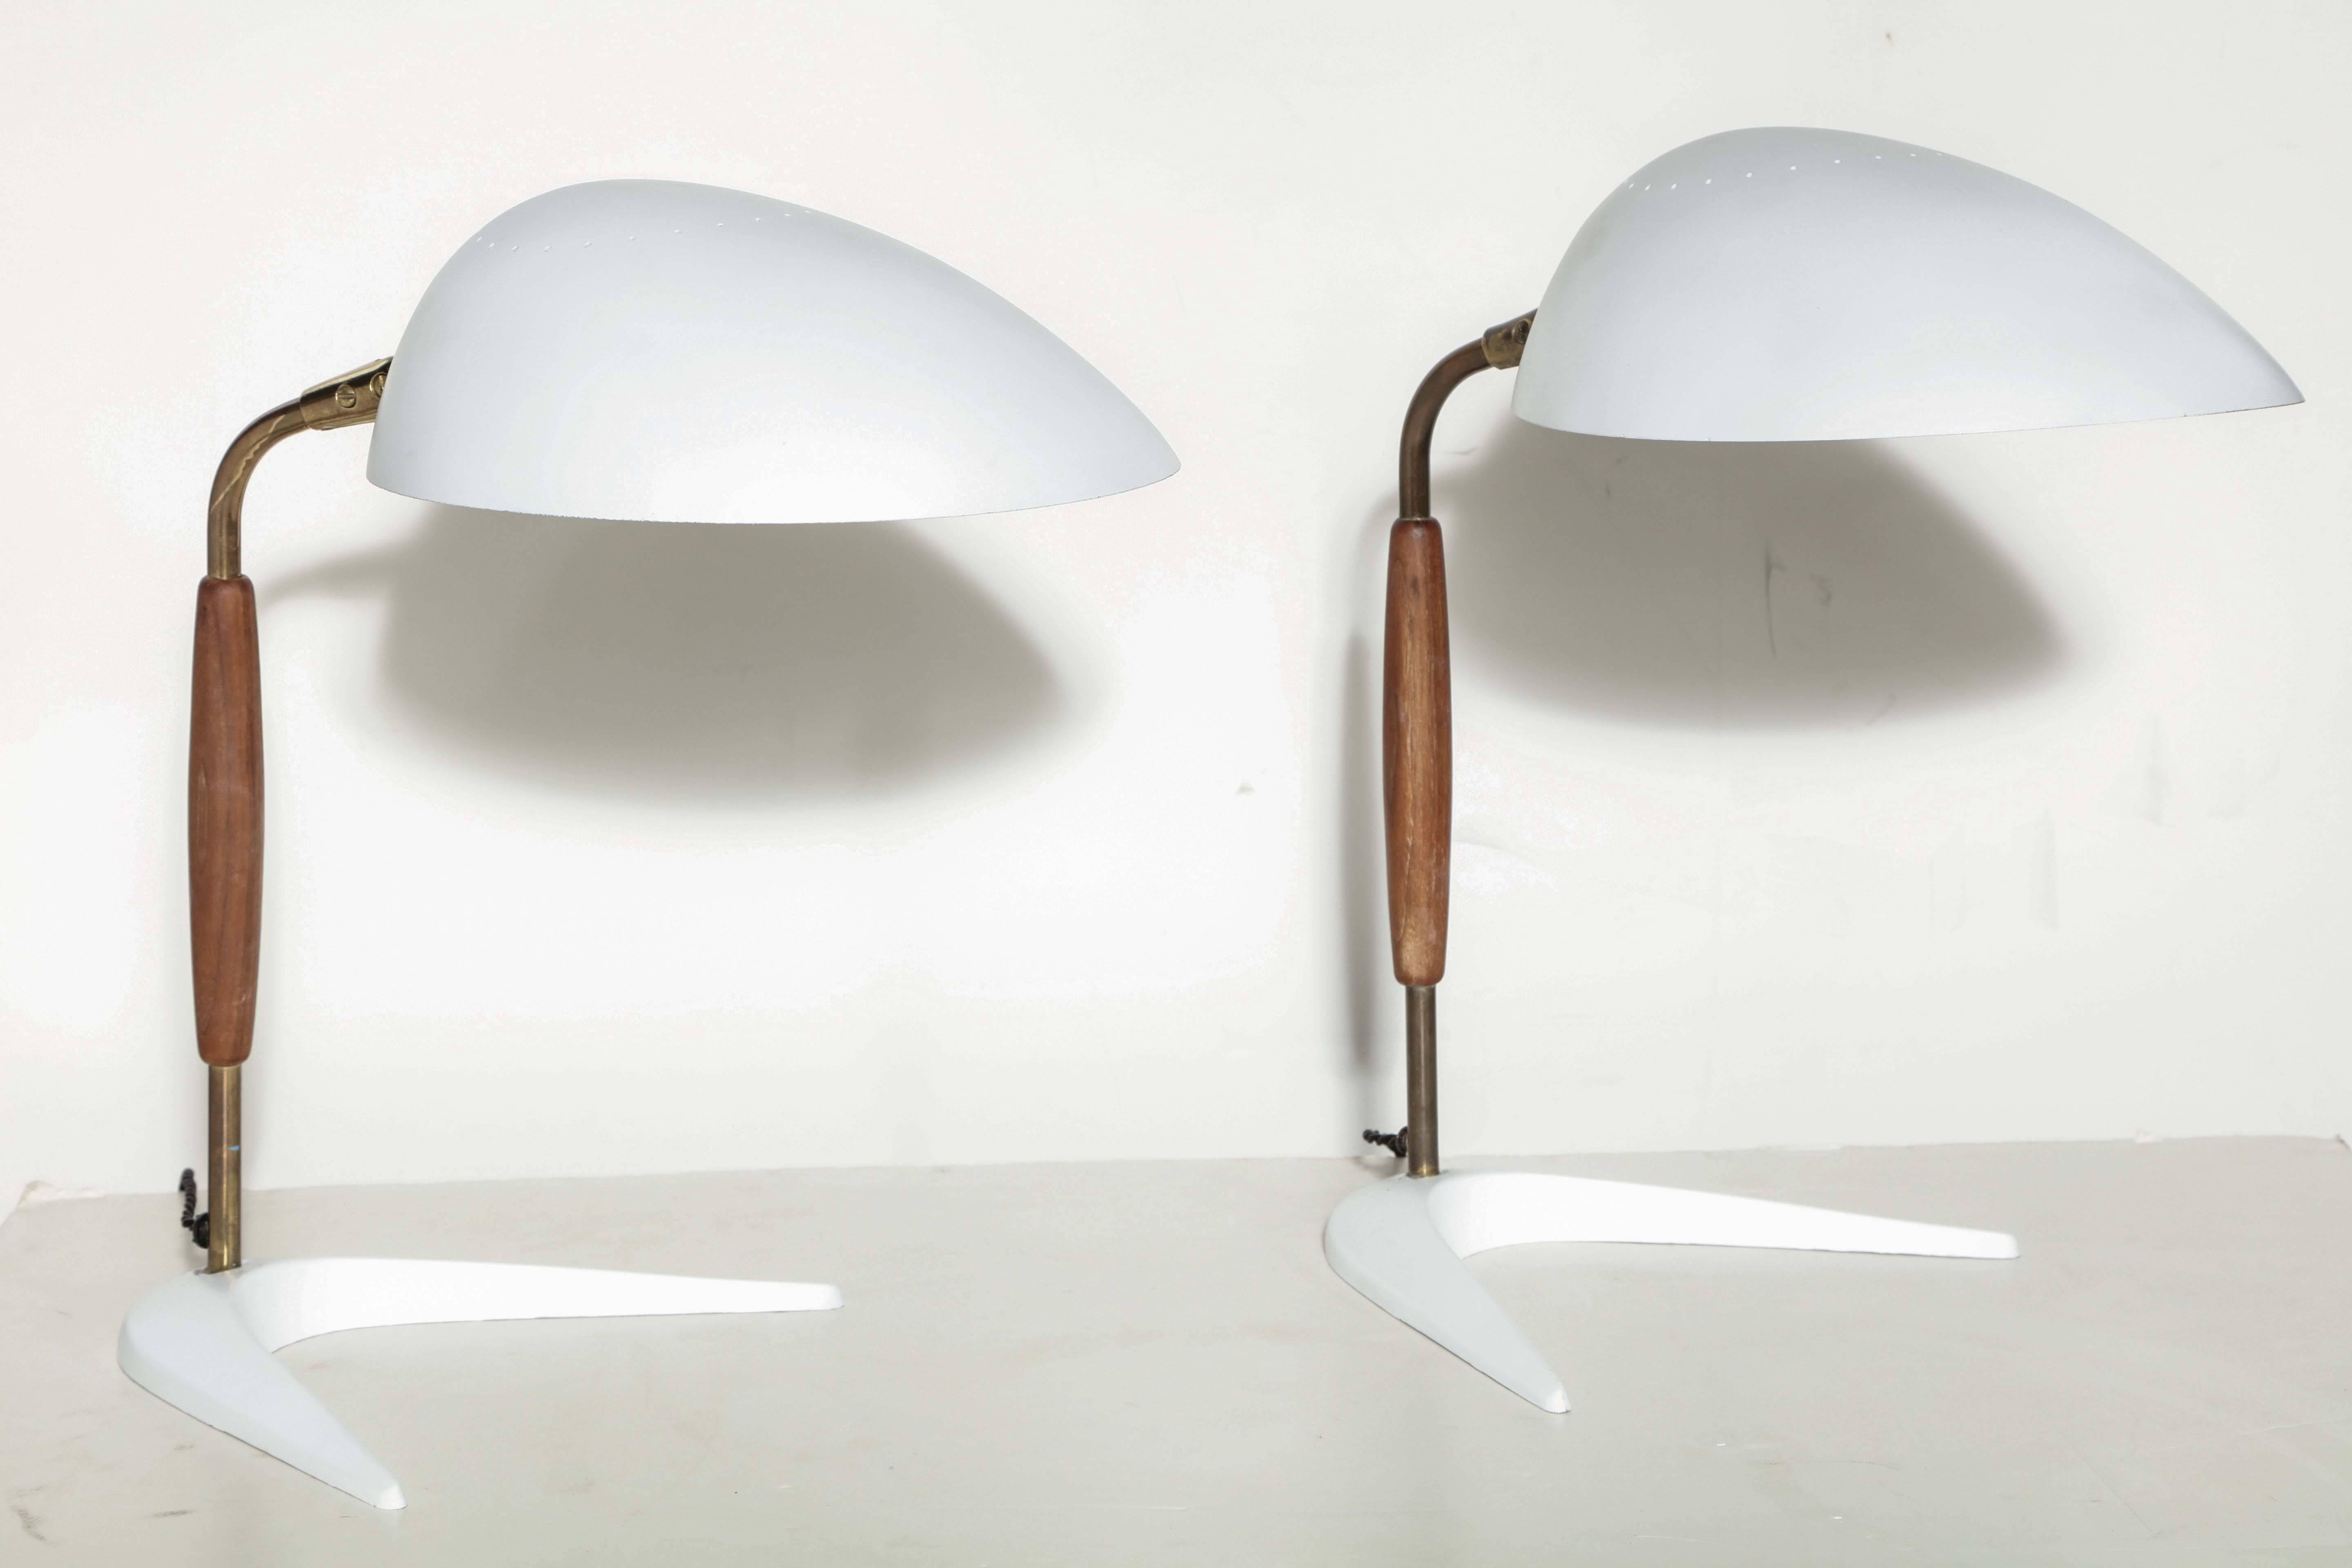 American Mid-Century Modern Gerald Thurston Articulating Boomerang Desk Lamps. Featuring a Teak handle, patinated Brass stem, adjustable and perforated White enameled metal hood Shade and heavy boomerang metal base. Without diffuser. Two Lamps